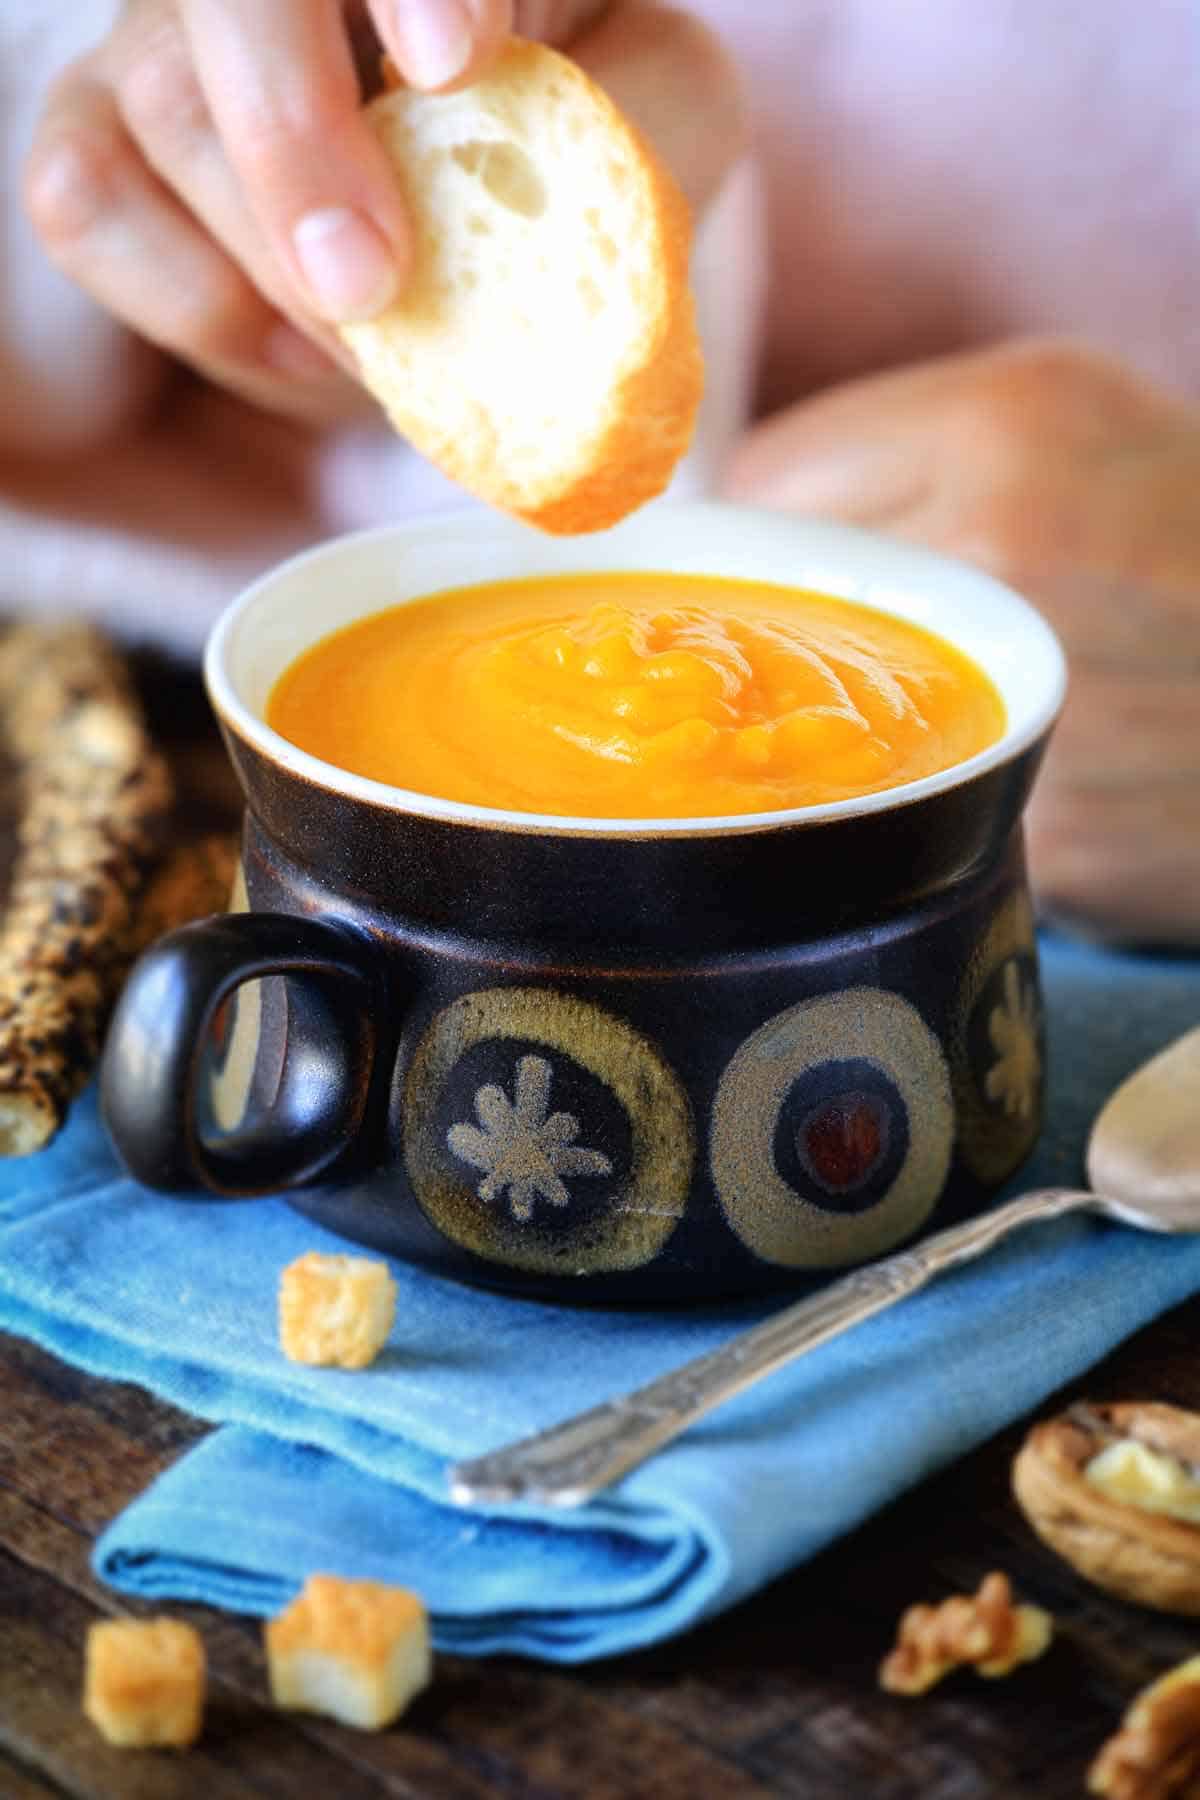 Dunking a piece of crusty bread in a bowl of pumpkin soup.